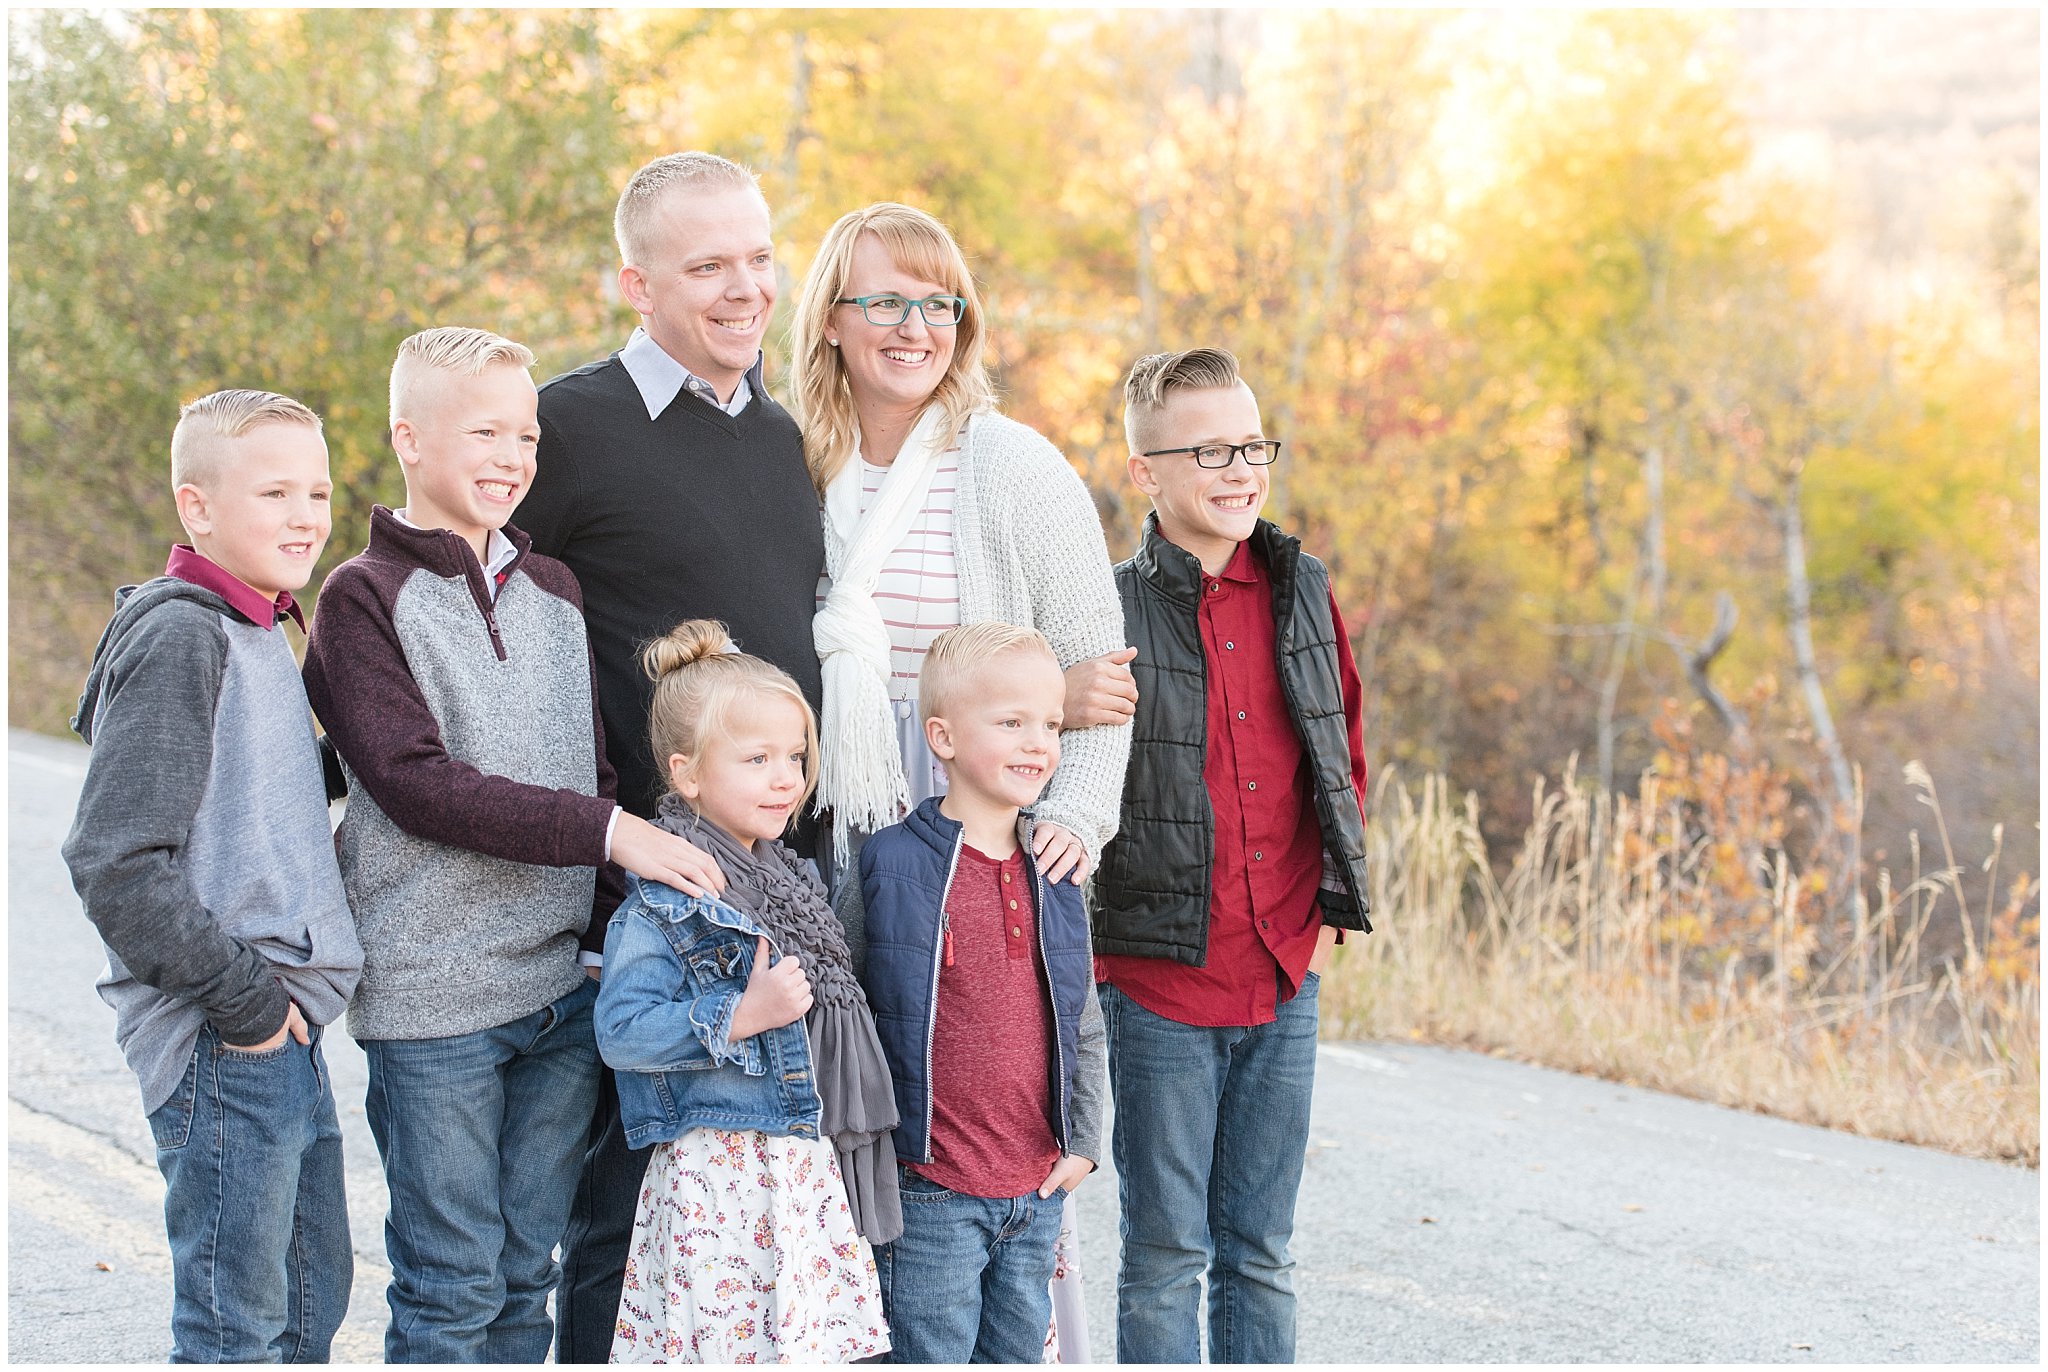 Candid view of family | Fall Family Pictures in the Mountains | Snowbasin, Utah | Jessie and Dallin Photography